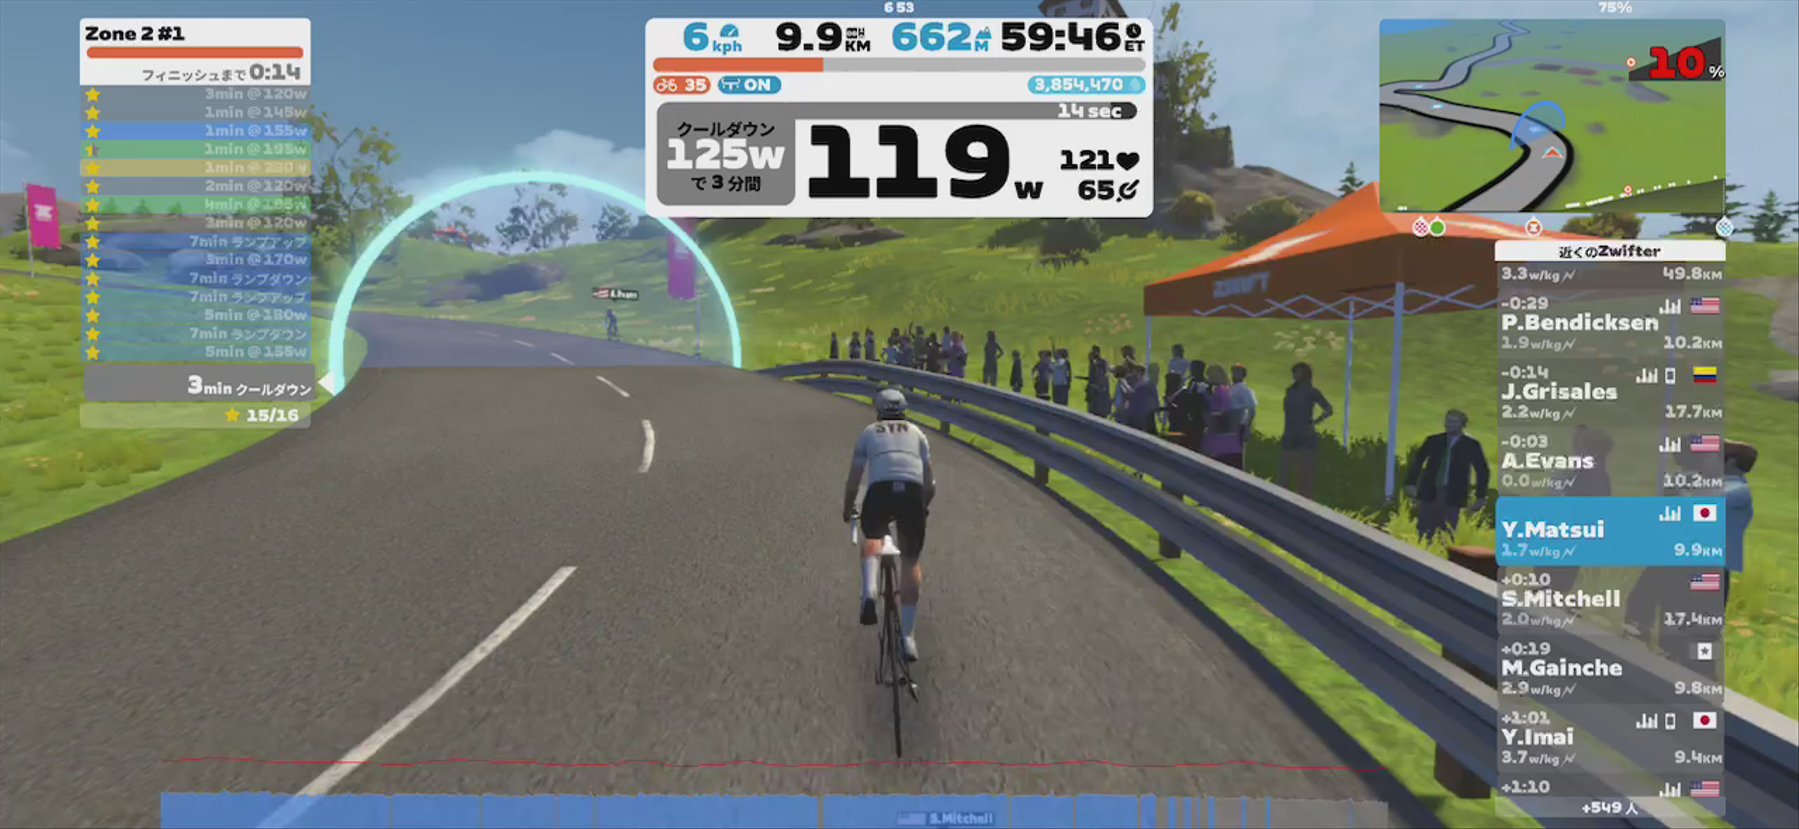 Zwift - Zone 2 #1 on Ven-Top in France